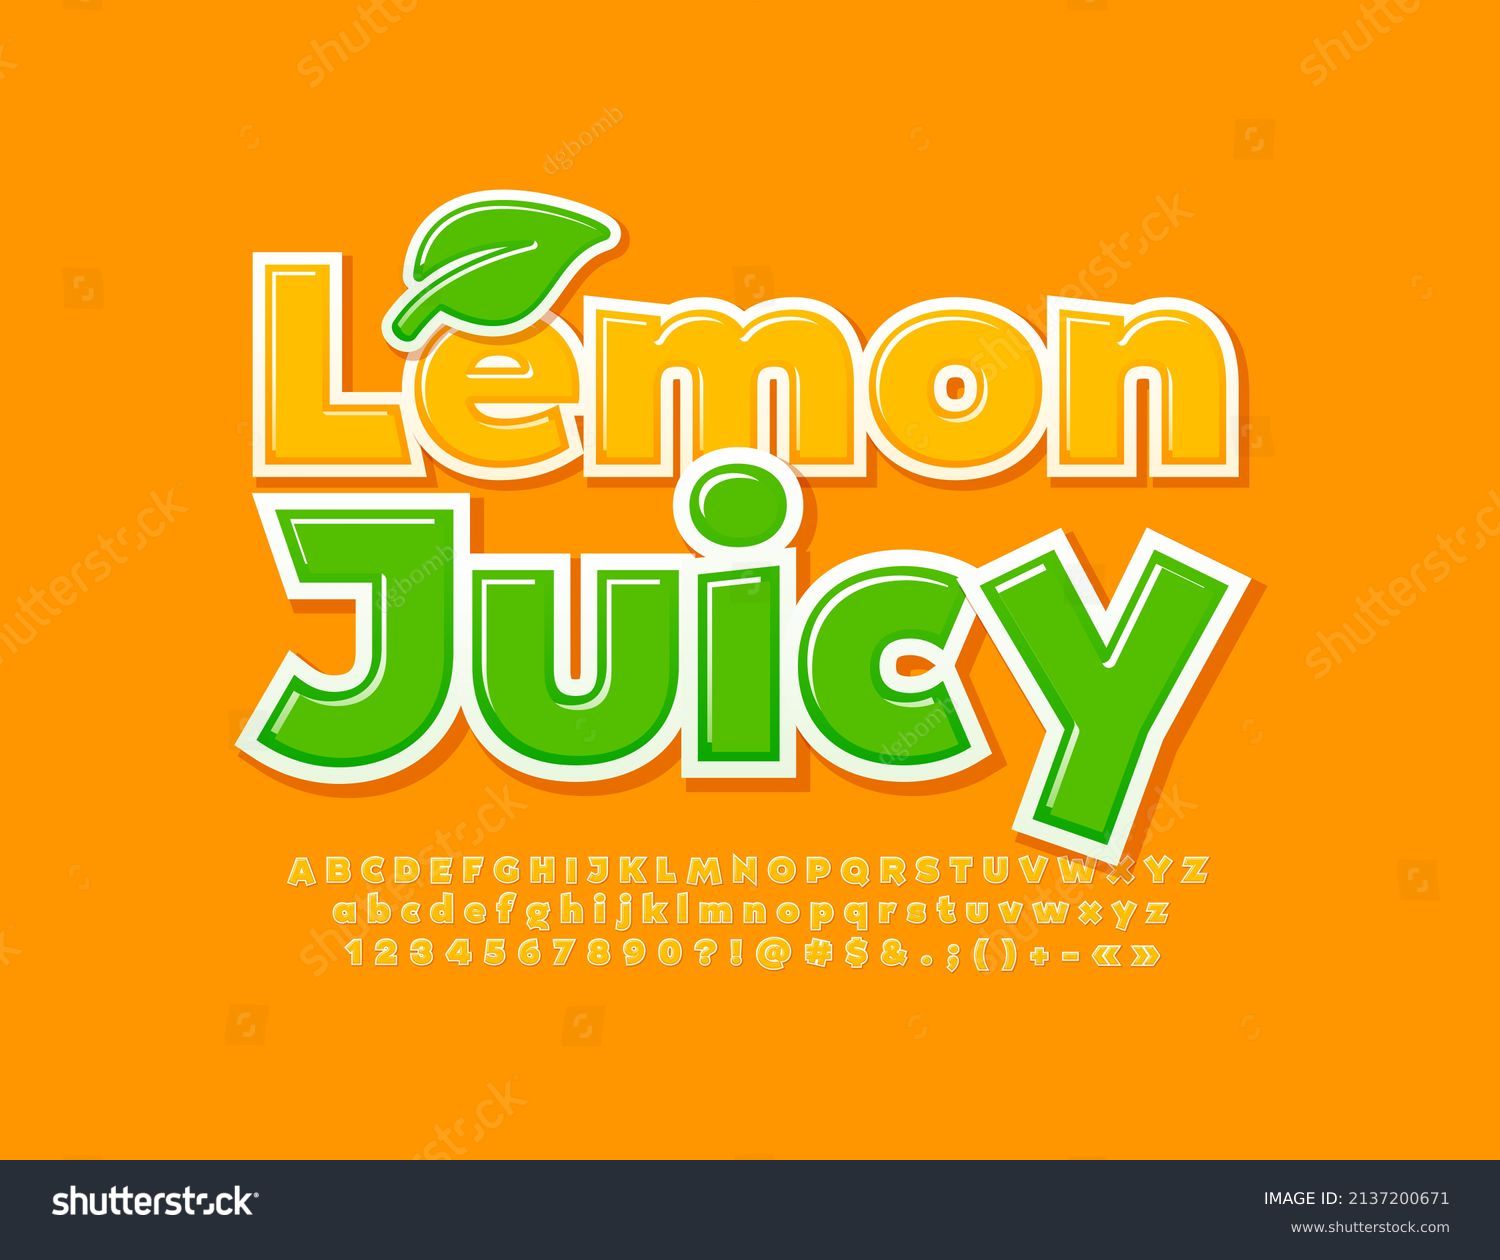 Vector bright emblem Lemon Juicy with decorative Leaf. Yellow modern Font. Glossy Alphabet Letters and Numbers set  #2137200671